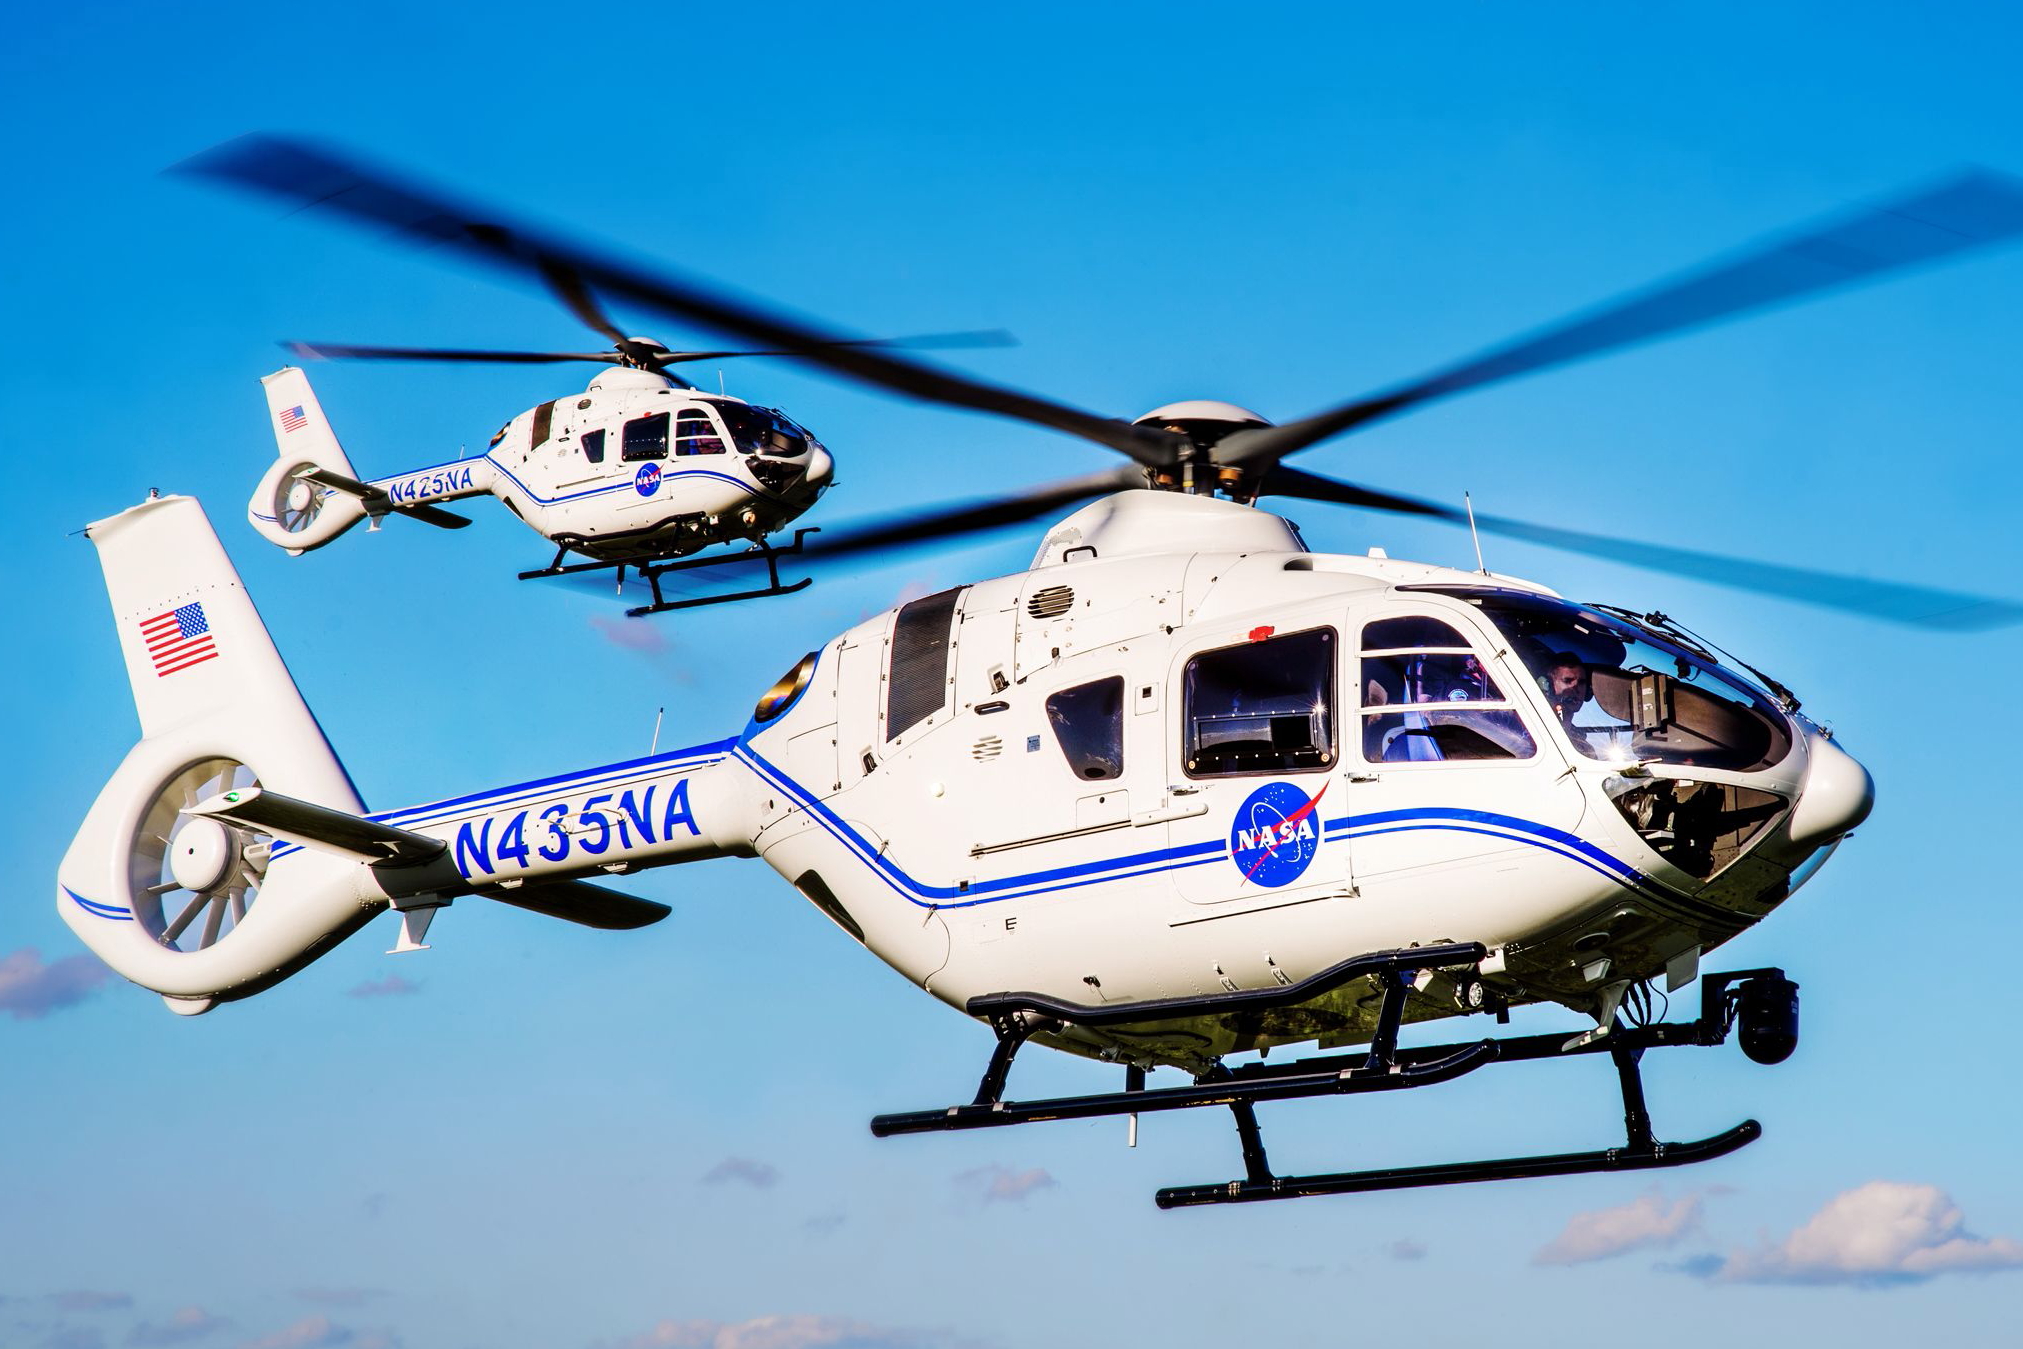 The National Aeronautics and Space Administration (NASA) has taken delivery of  two new H135 helicopters. The two H135s, along with a third scheduled for delivery early next year, will be based at NASA’s Kennedy Space Center in Florida and operated for a variety of missions, including aerial security at rocket launches, emergency medical services, research, and qualified passenger transportation.. Click to enlarge.